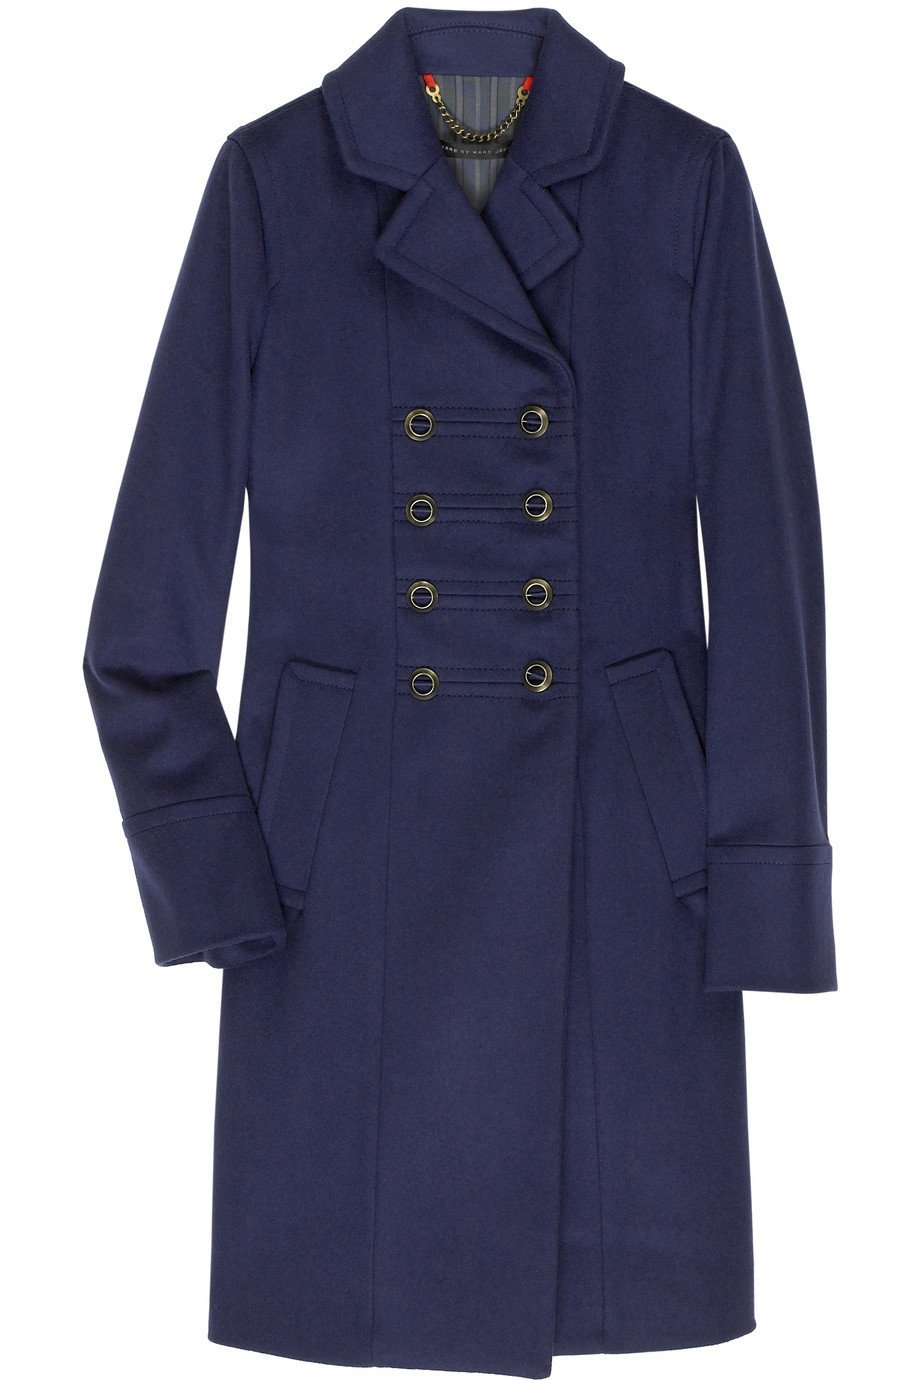 Marc by Marc Jacobs Double-Breasted Wool-Blend Coat.jpg